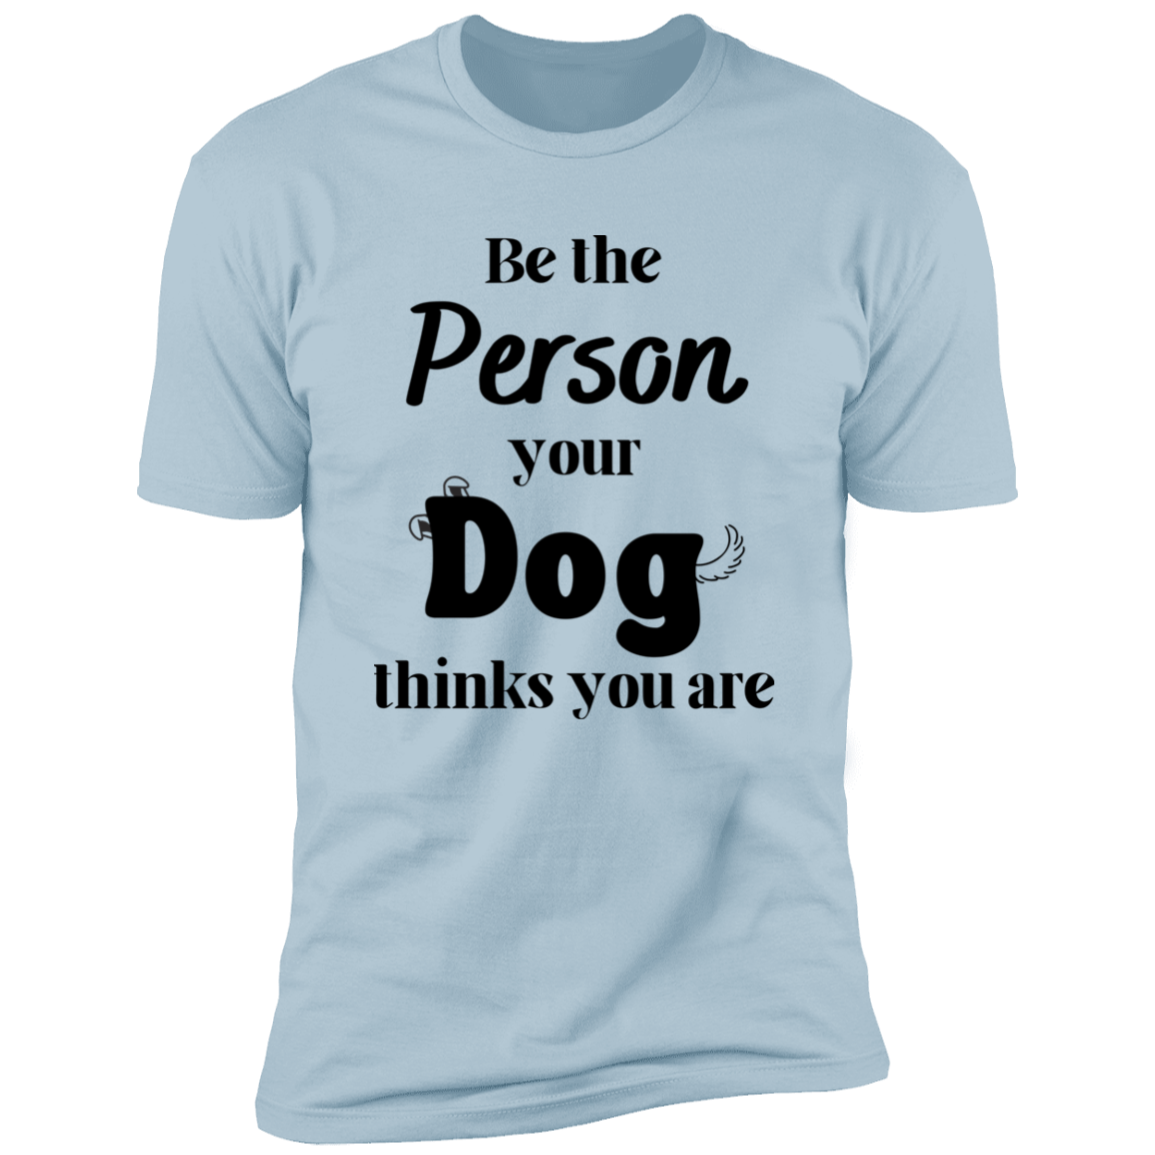 Be the Person Your Dog Thinks You Are T-shirt, Dog Shirt for humans, in light blue